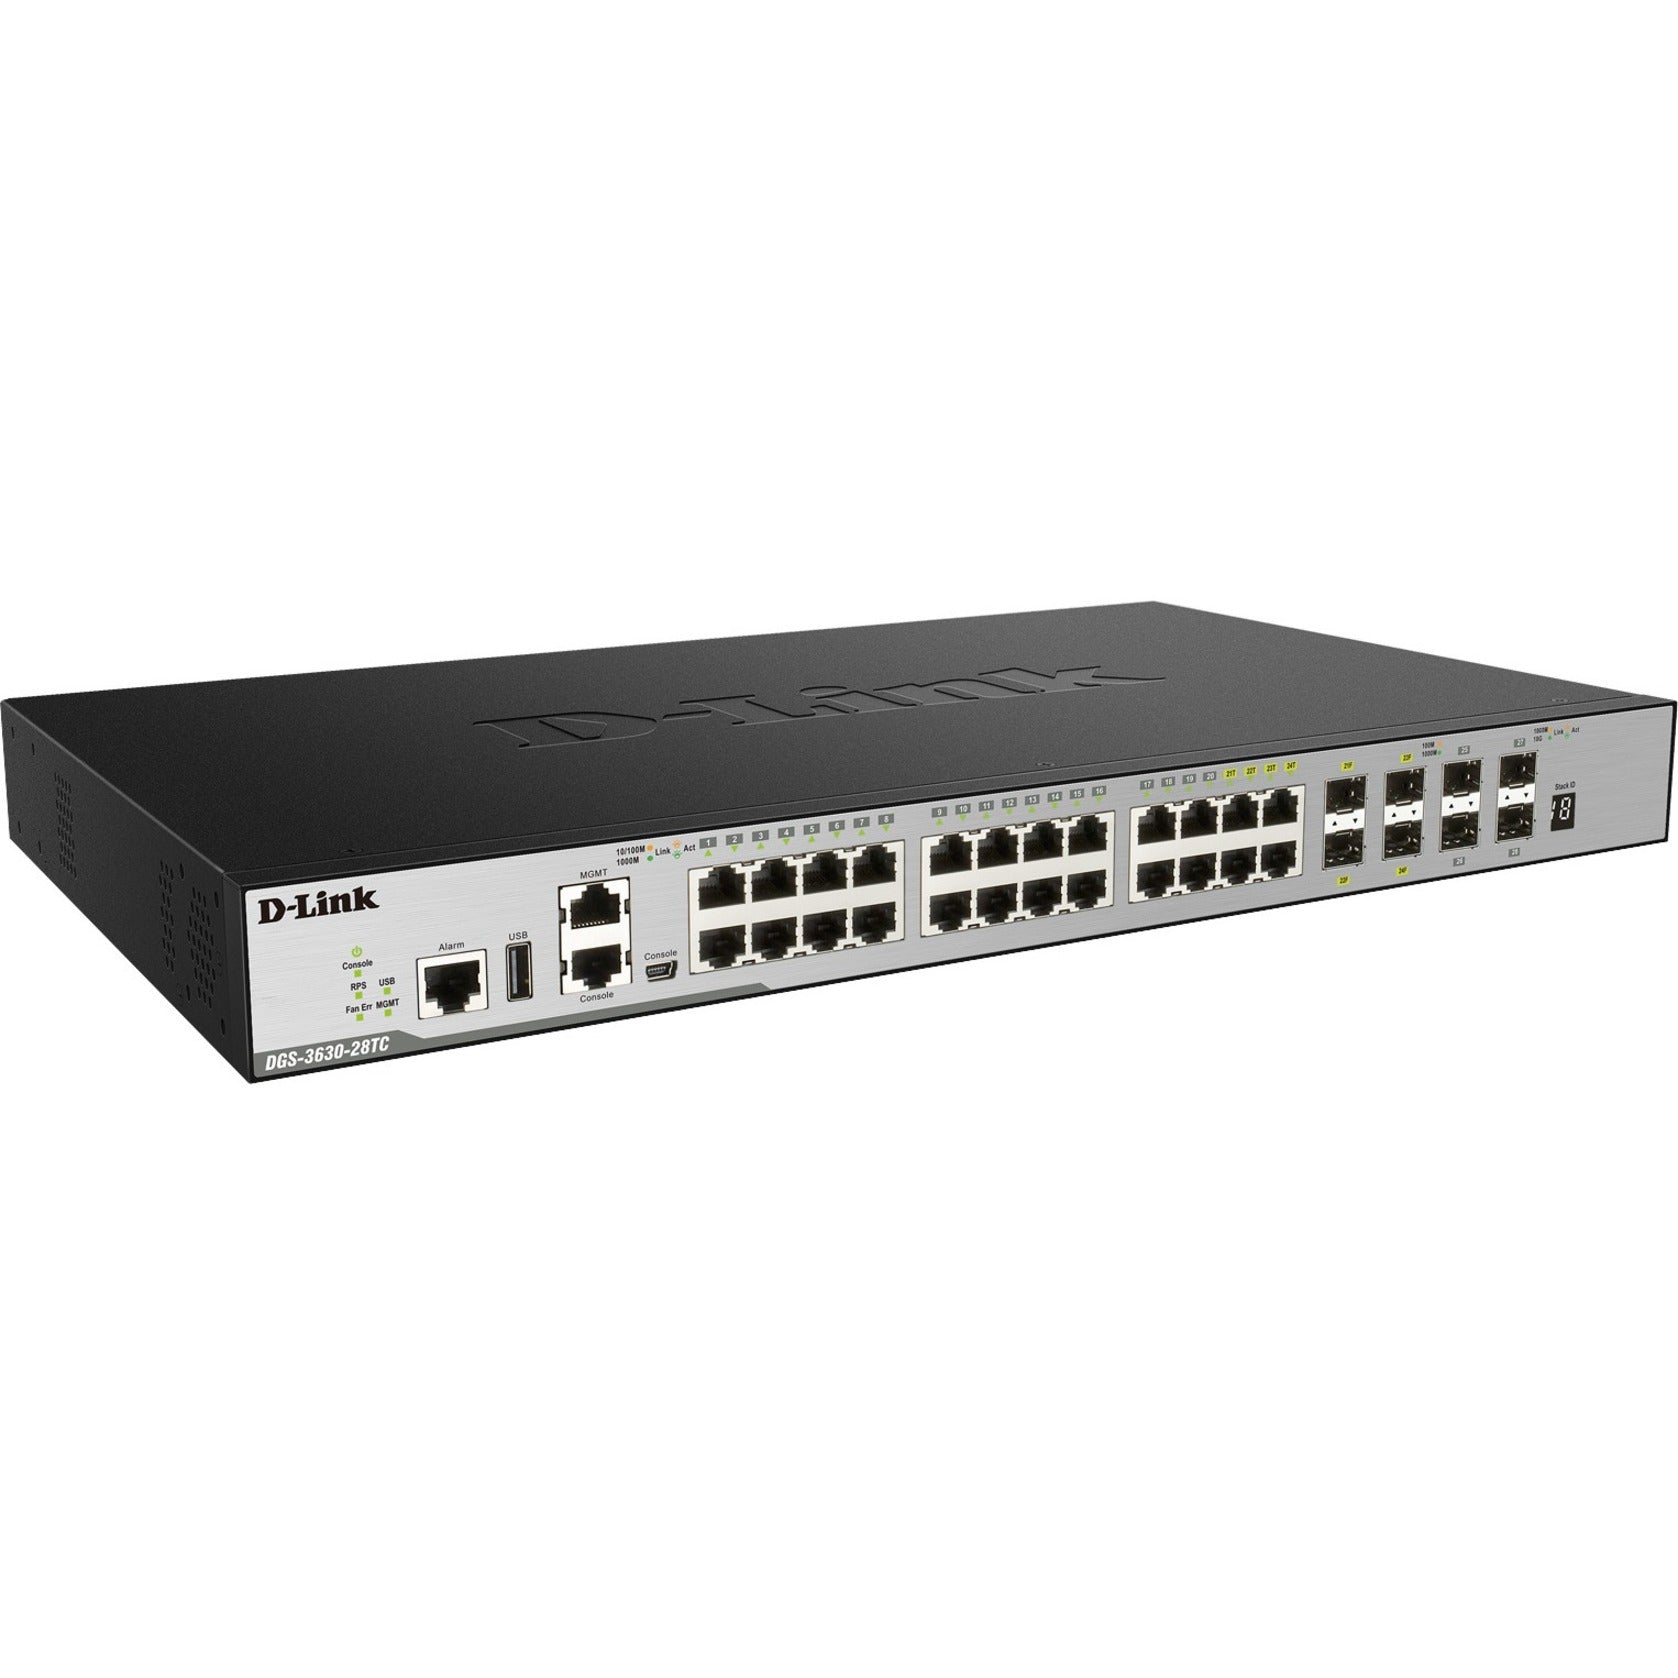 D-Link DGS-3630-28TC/SI 28-Port Layer 3 Stackable Managed Gigabit Switch, 4 10GbE Ports